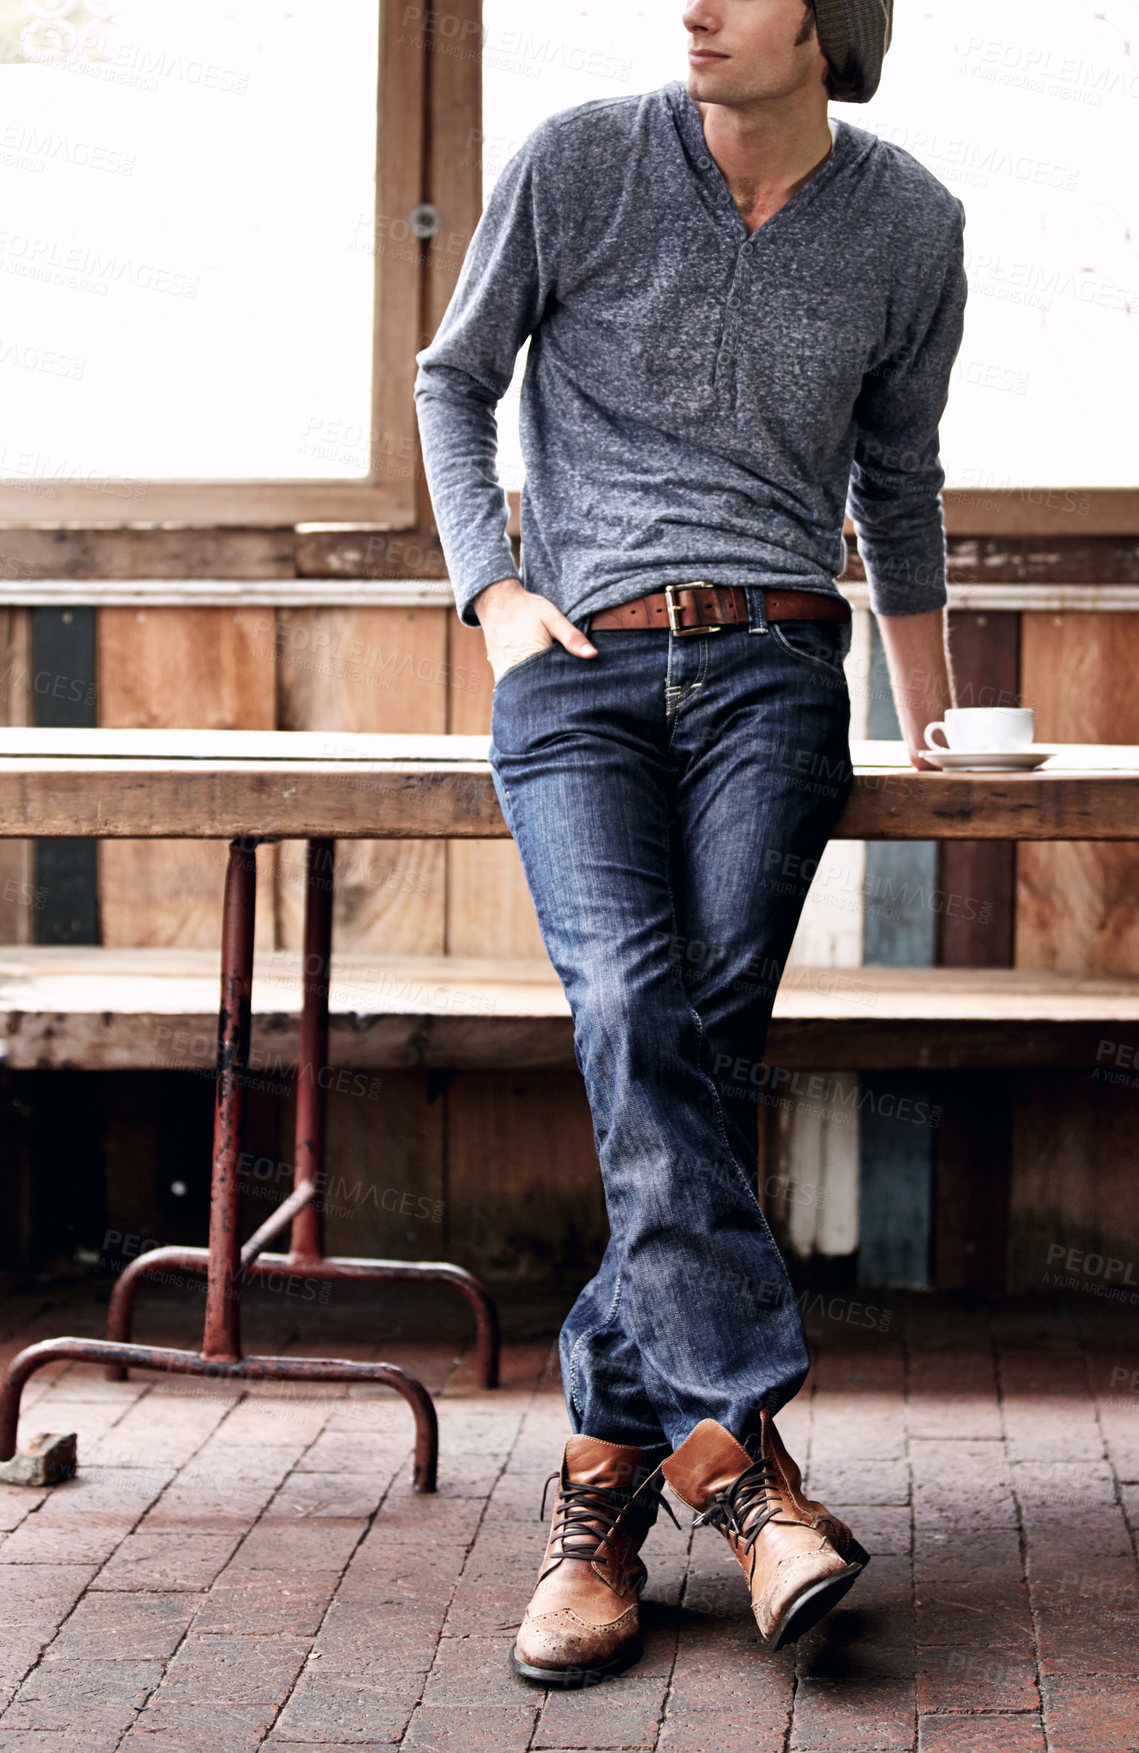 Buy stock photo Man, jeans and vintage coffee shop with fashion, drink and relax with shoes, espresso and hands in pockets. Student guy, retro cafe and clothes with matcha, tea cup and leather boots on brick floor